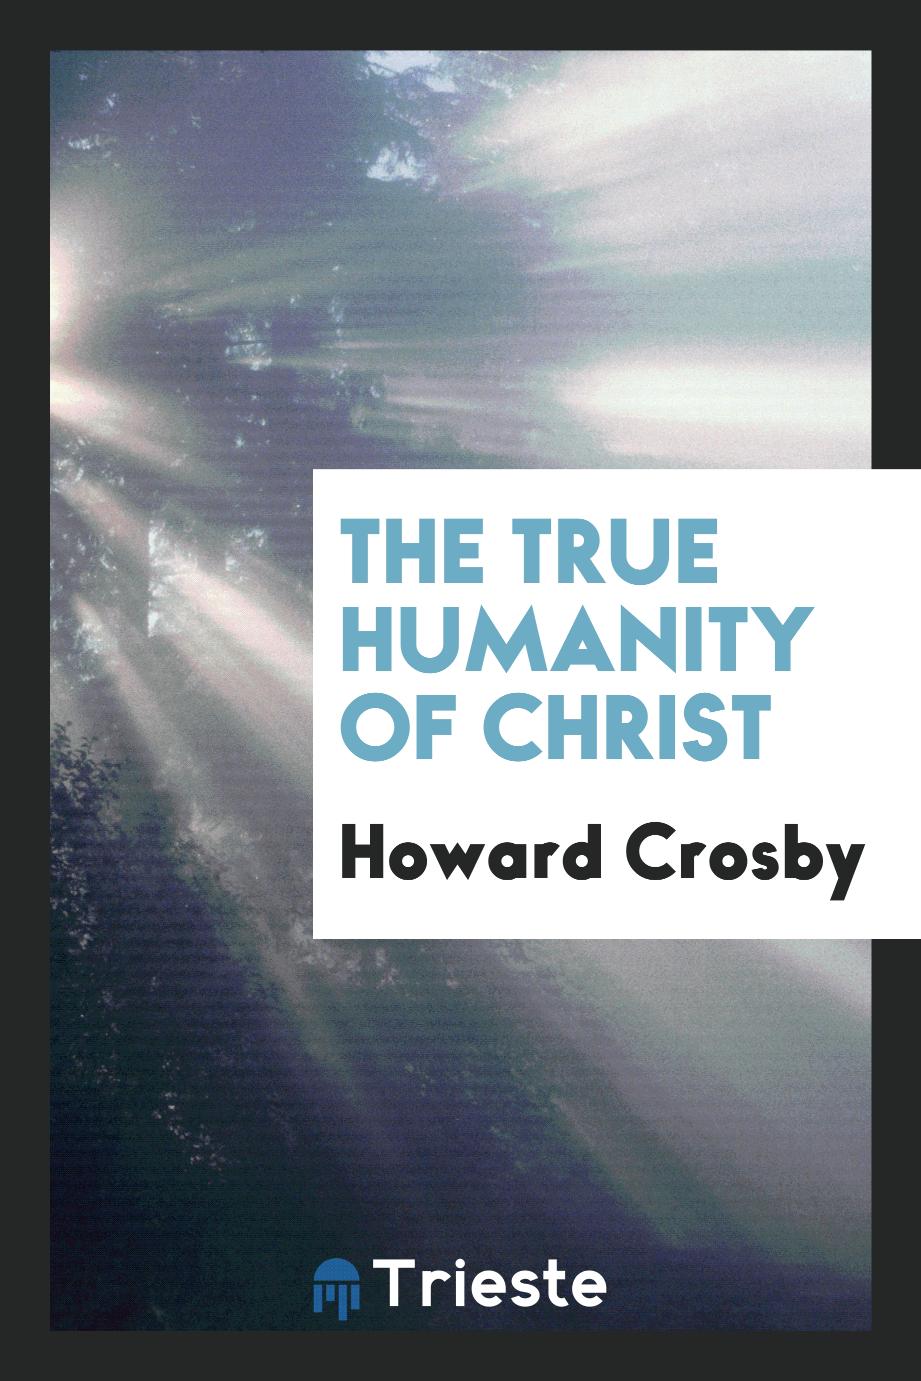 Howard Crosby - The True Humanity of Christ